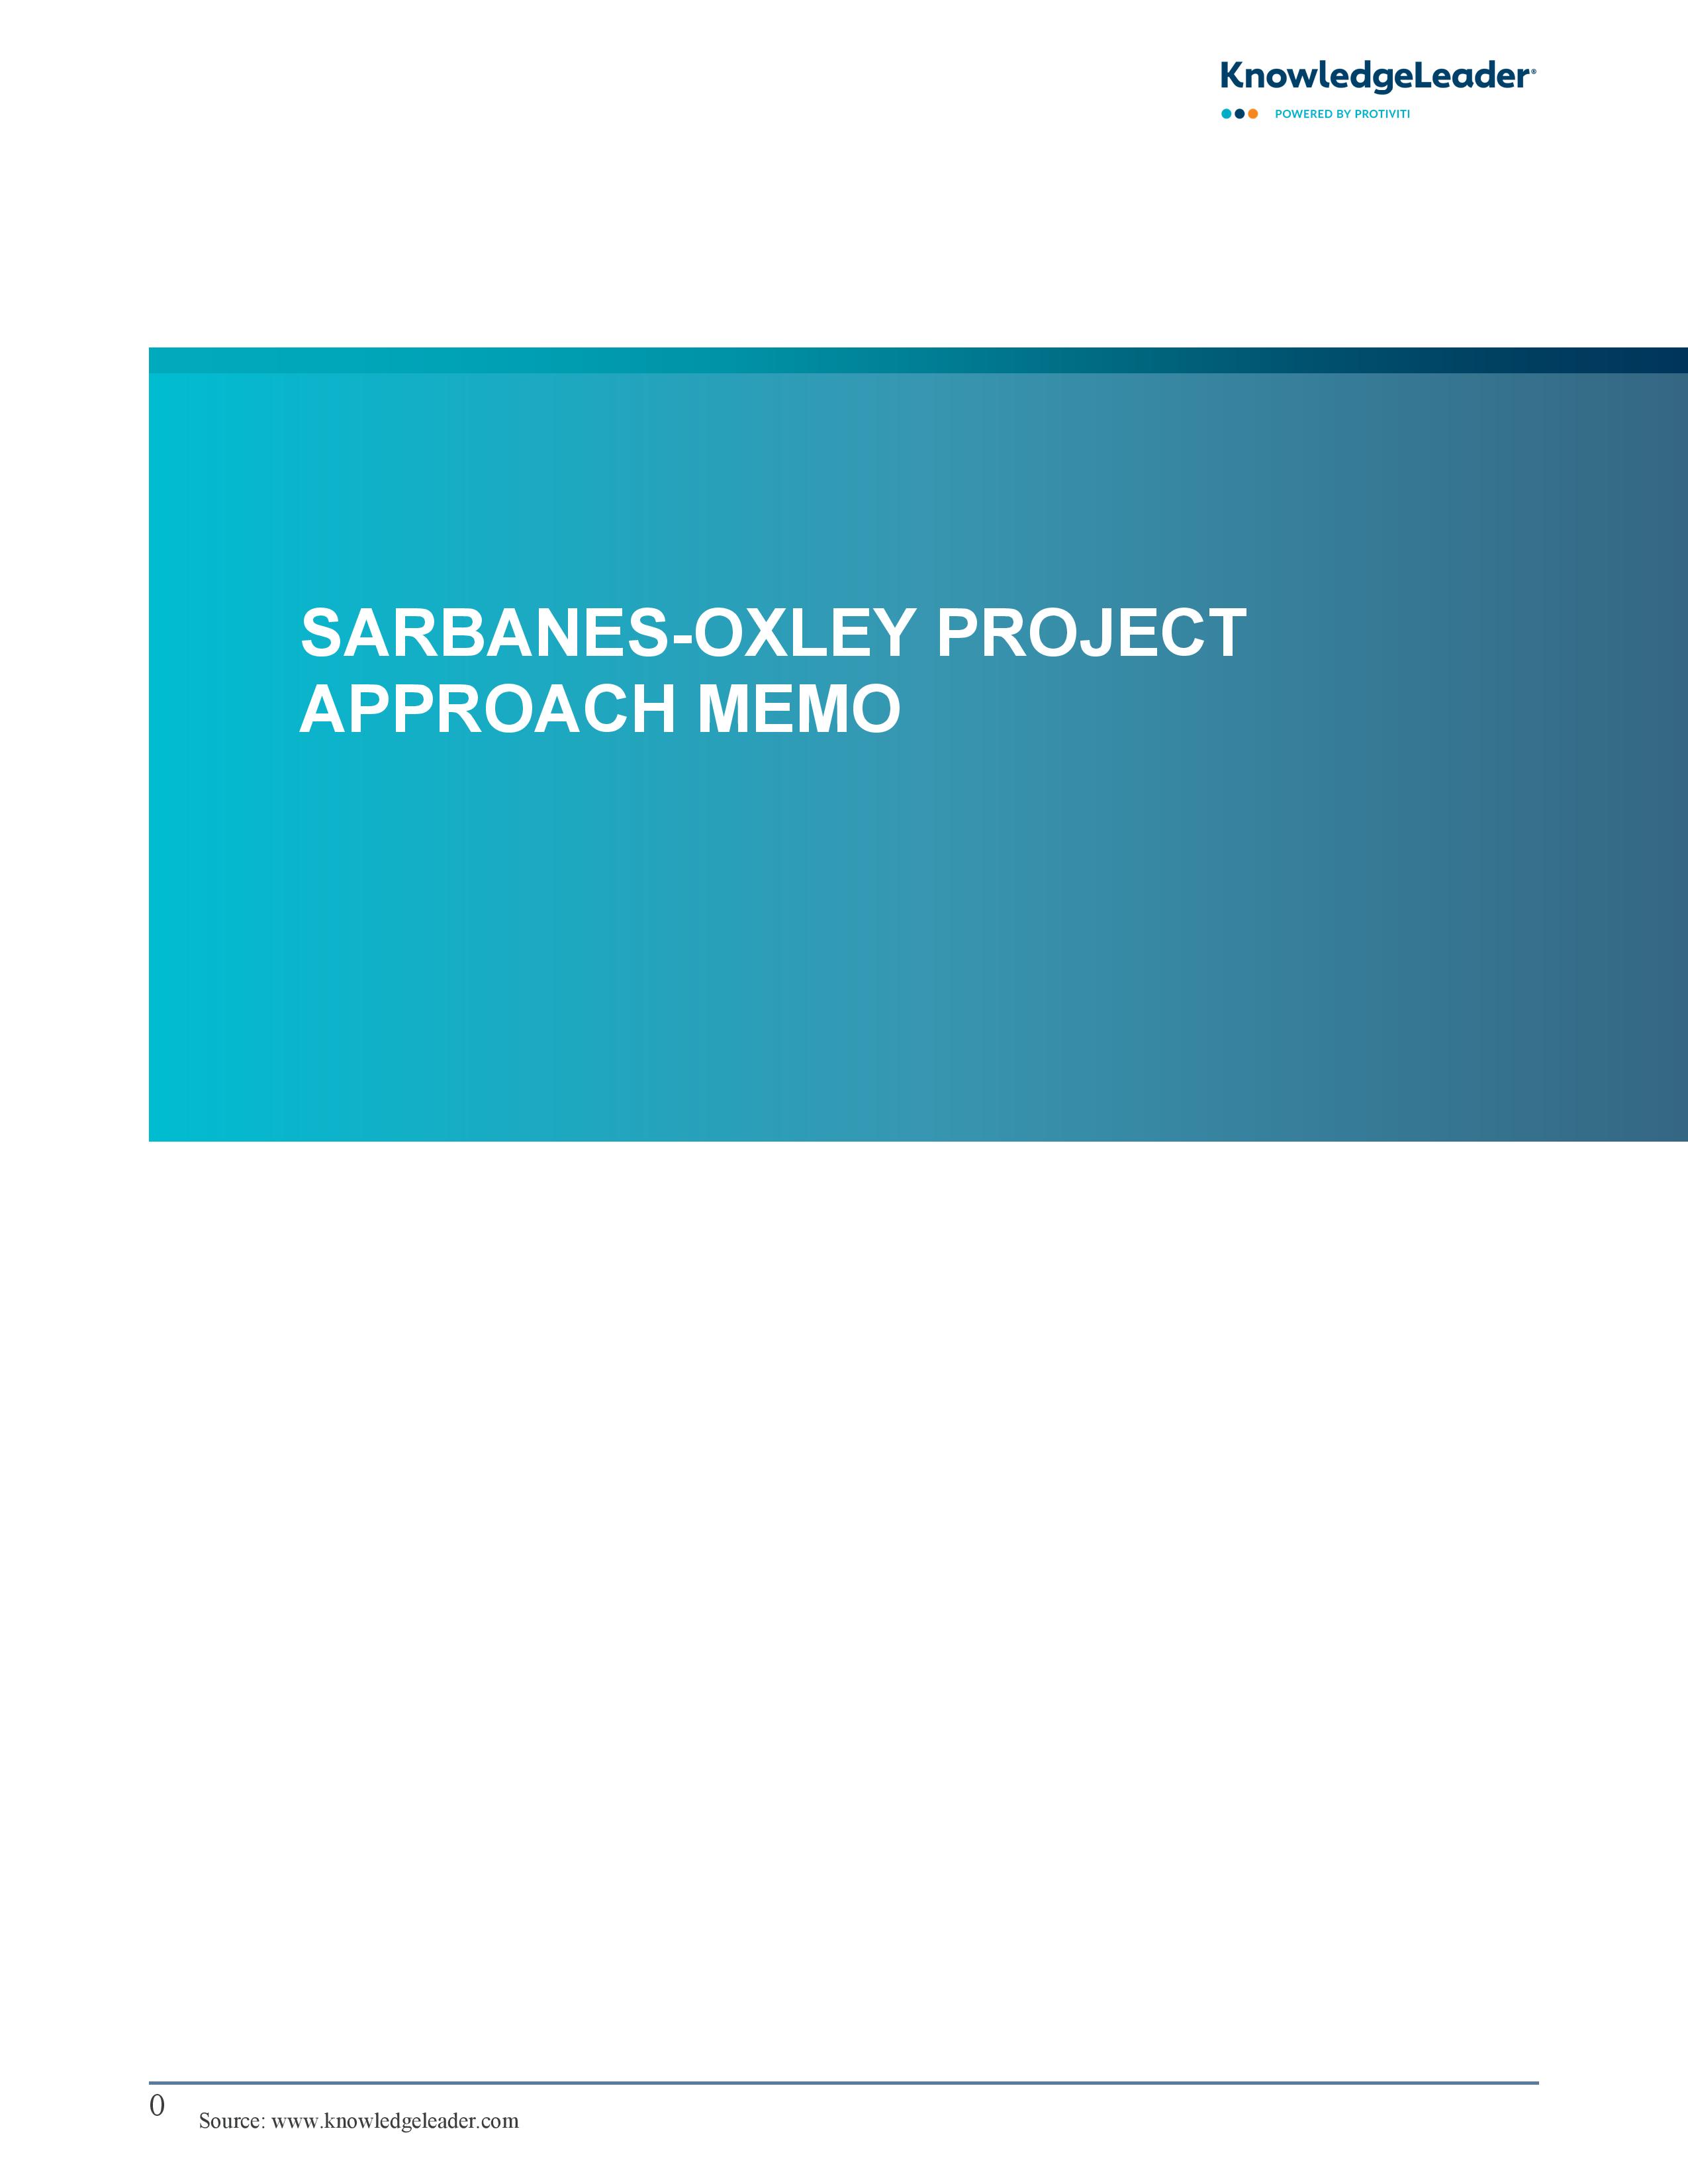 screenshot of the first page of Sarbanes-Oxley Act Project Approach Memo